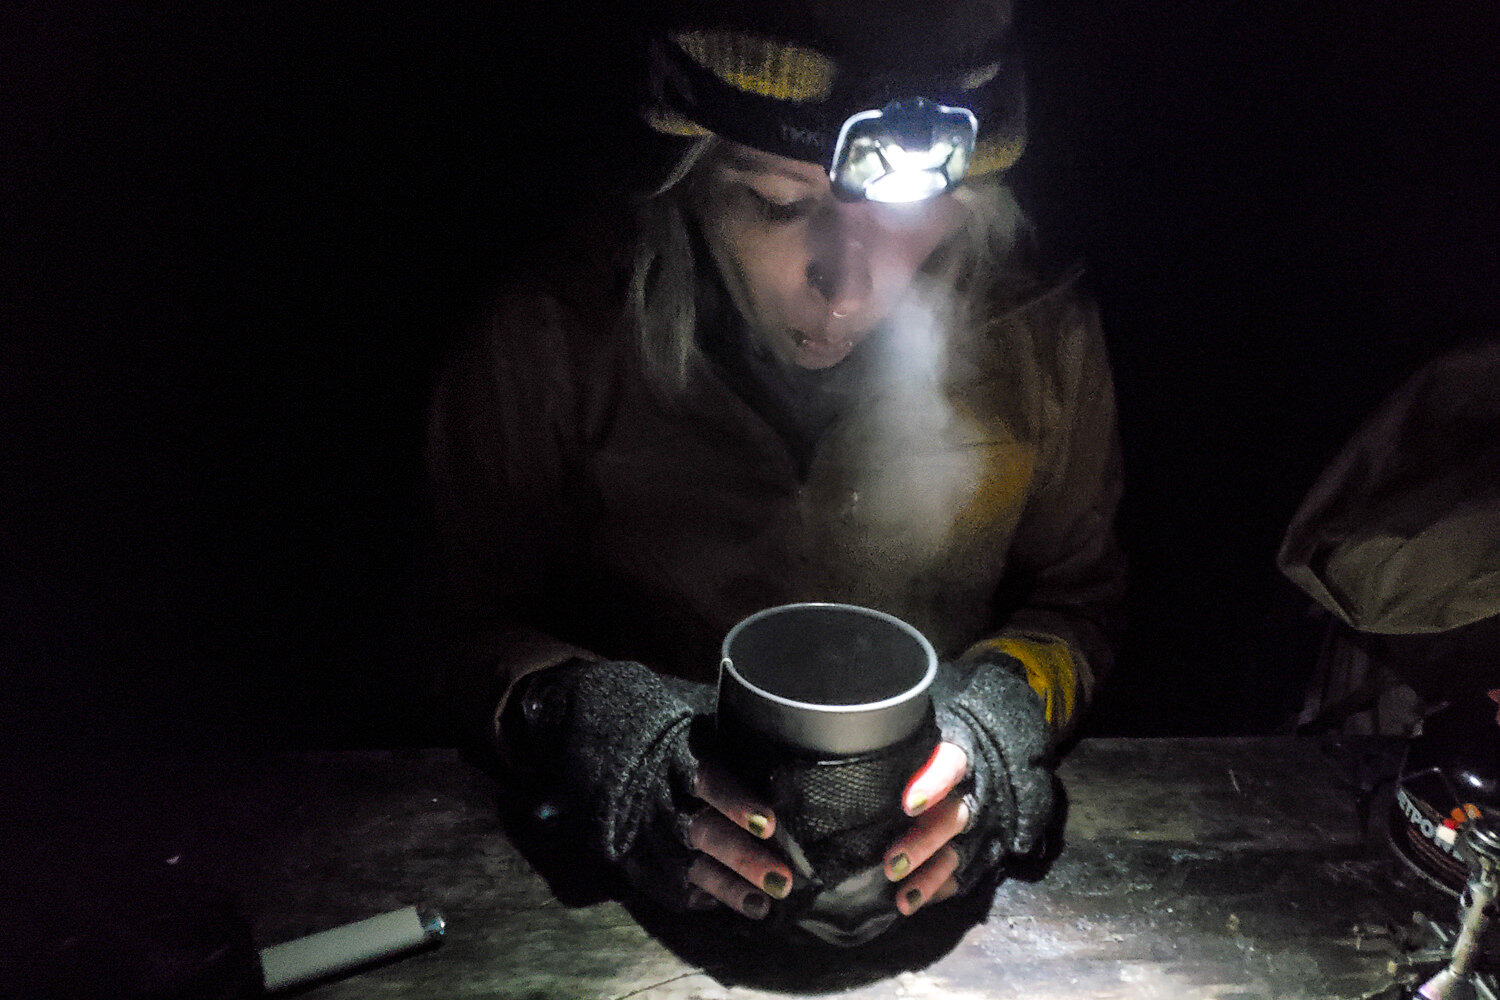 The Petzl Tikkina Headlamp is simple, easy to use, and very affordable.